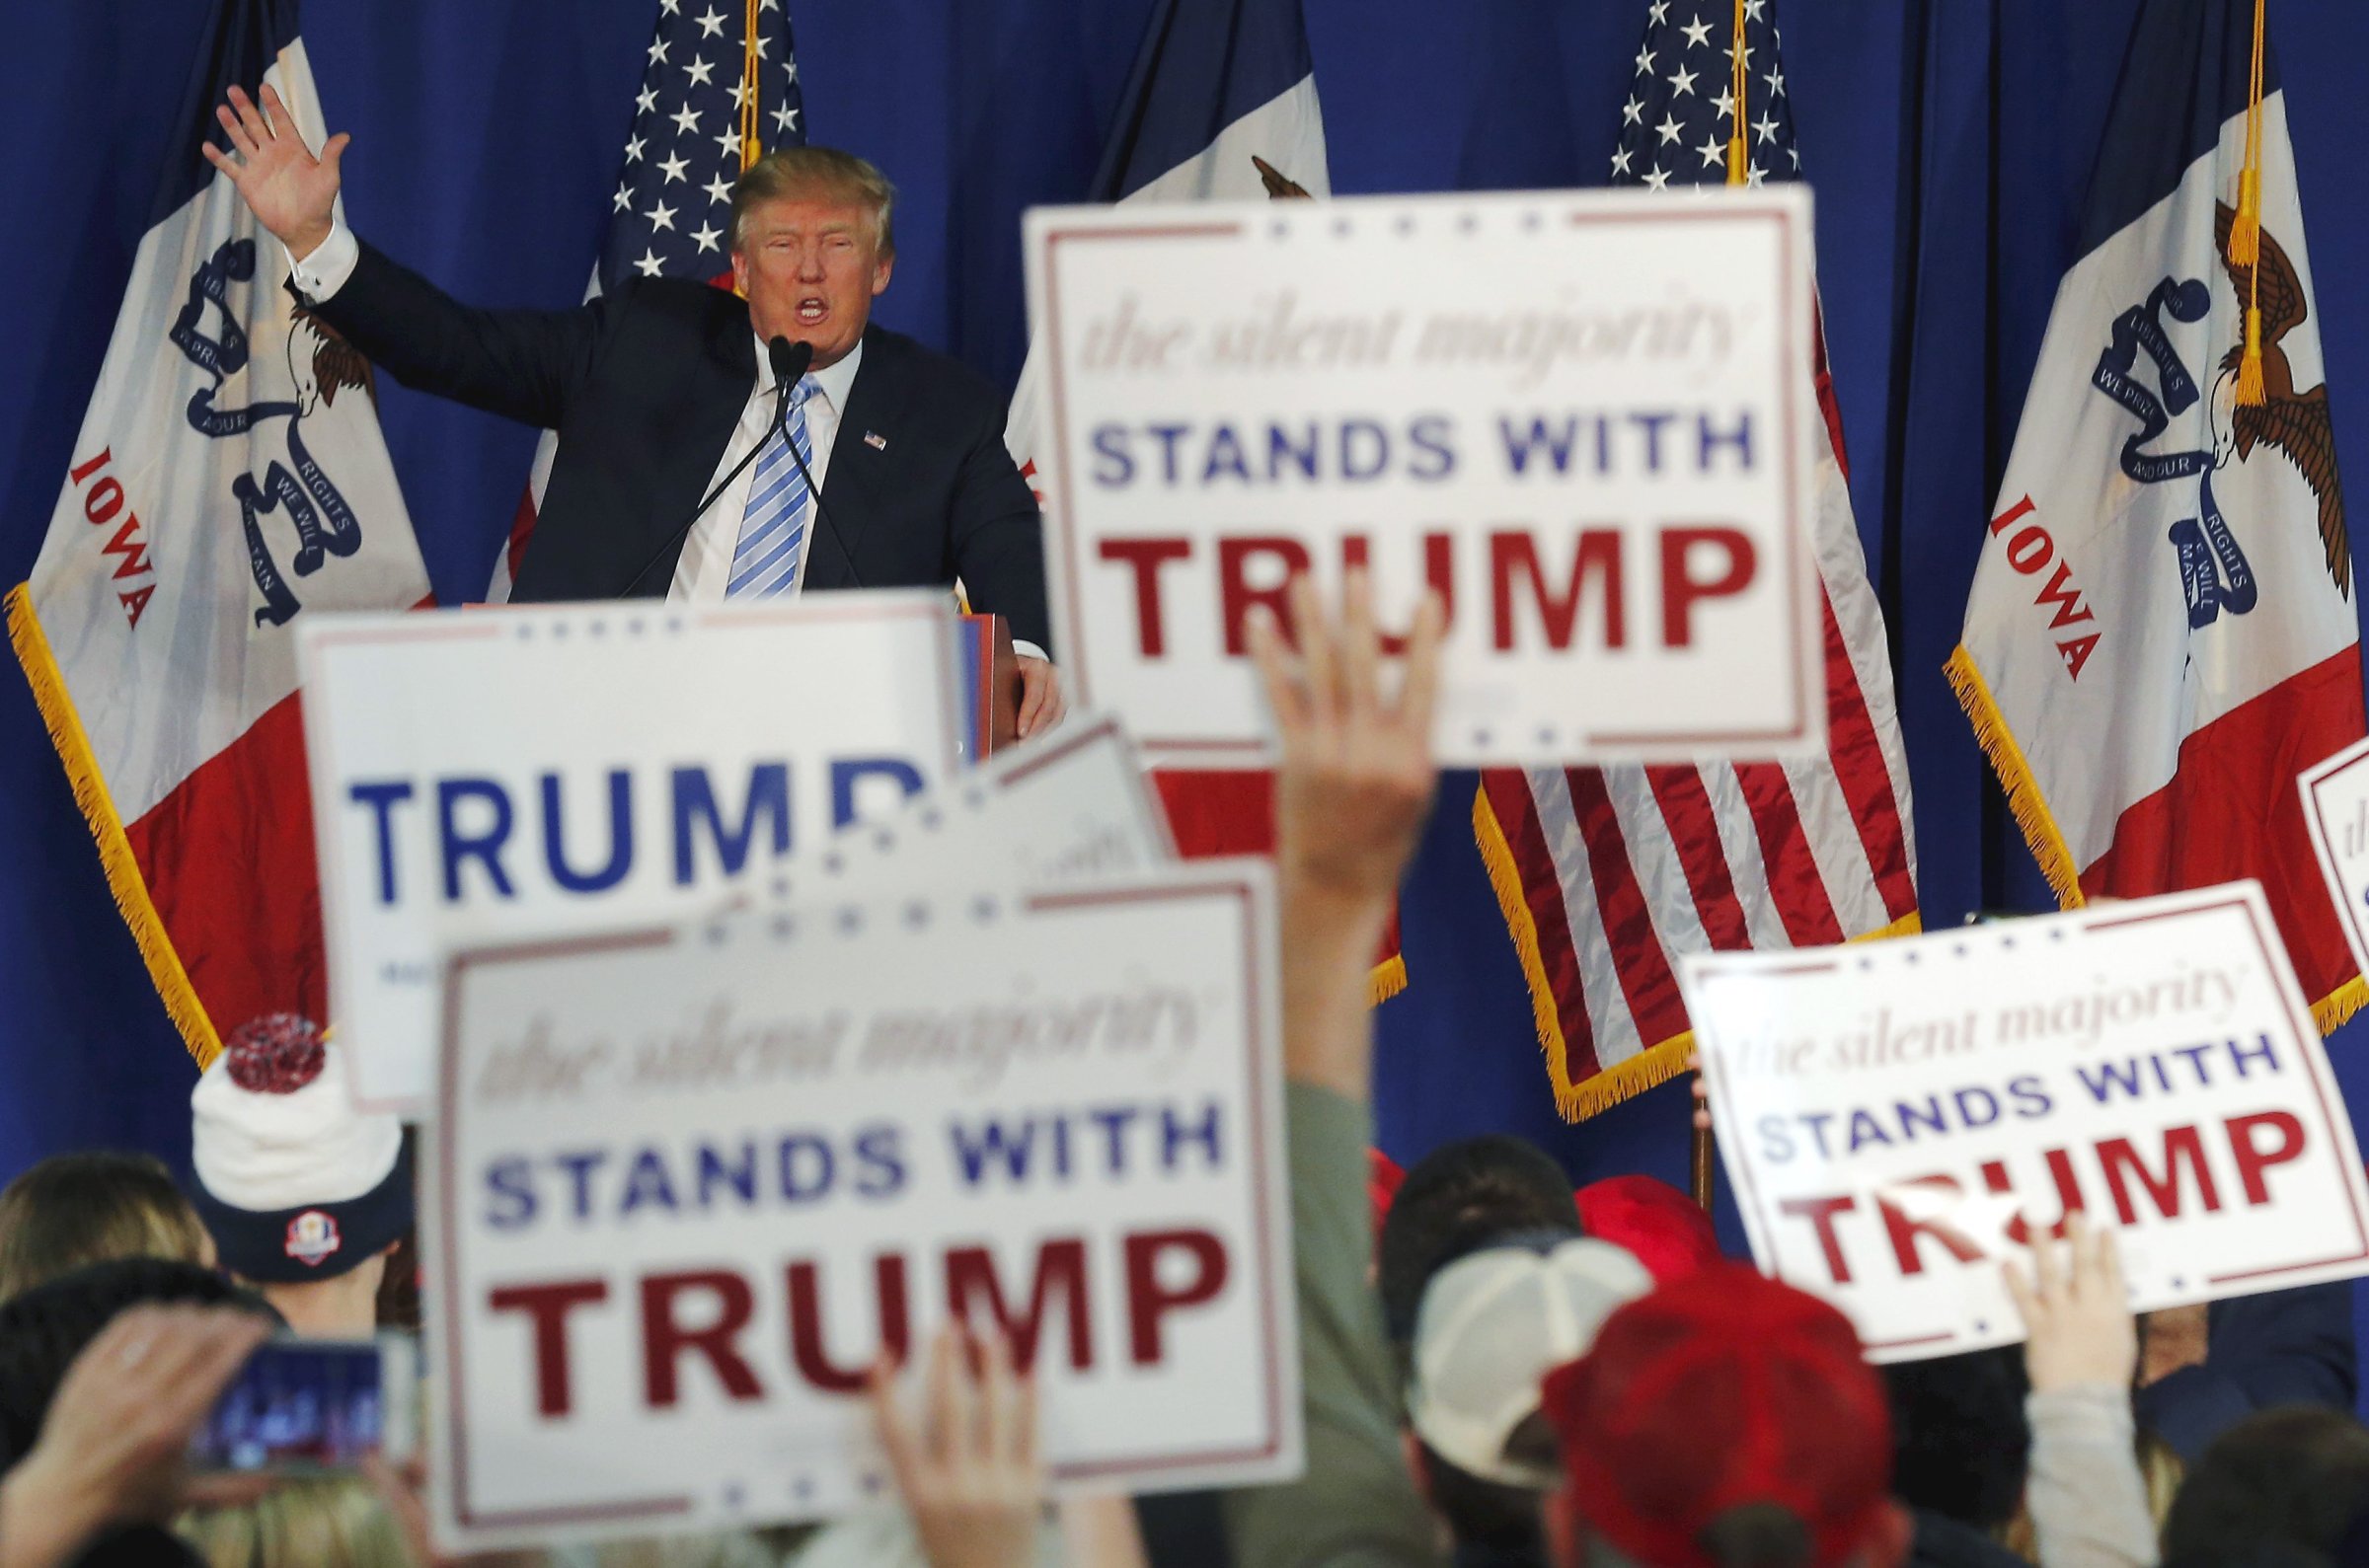 Republican presidential candidate Donald Trump speaks at a campaign event in Muscatine, Iowa on Jan. 24, 2016.